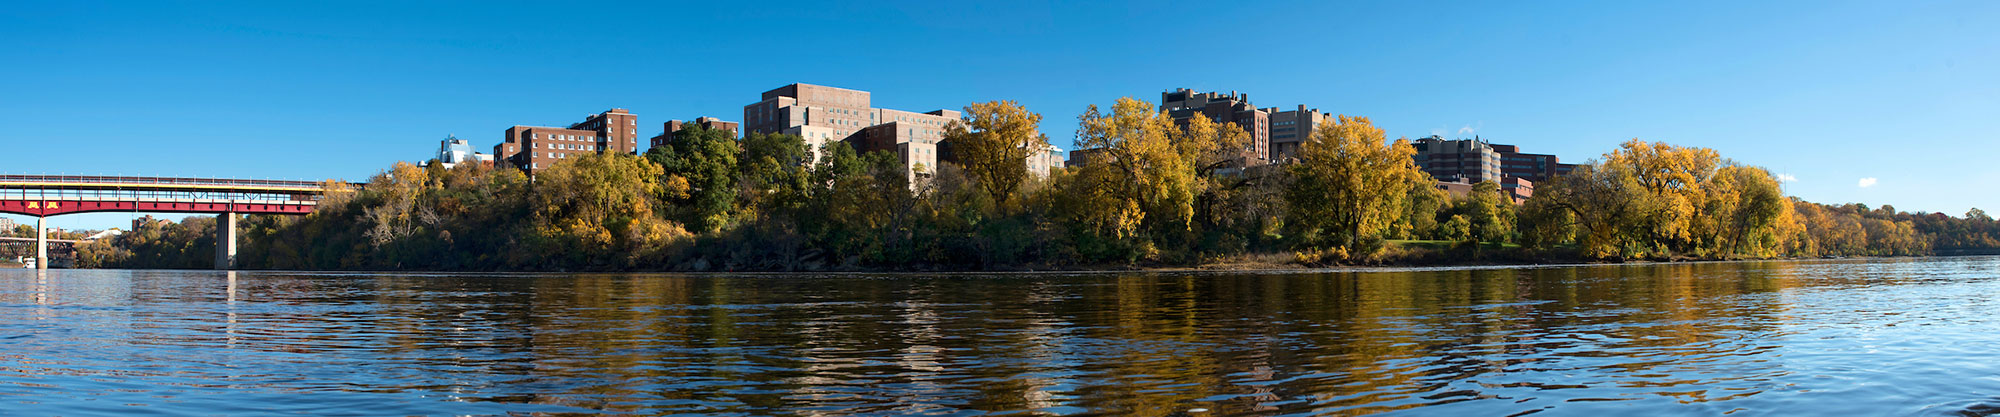 Panoramic of the Mississippi River next to the U of M campus